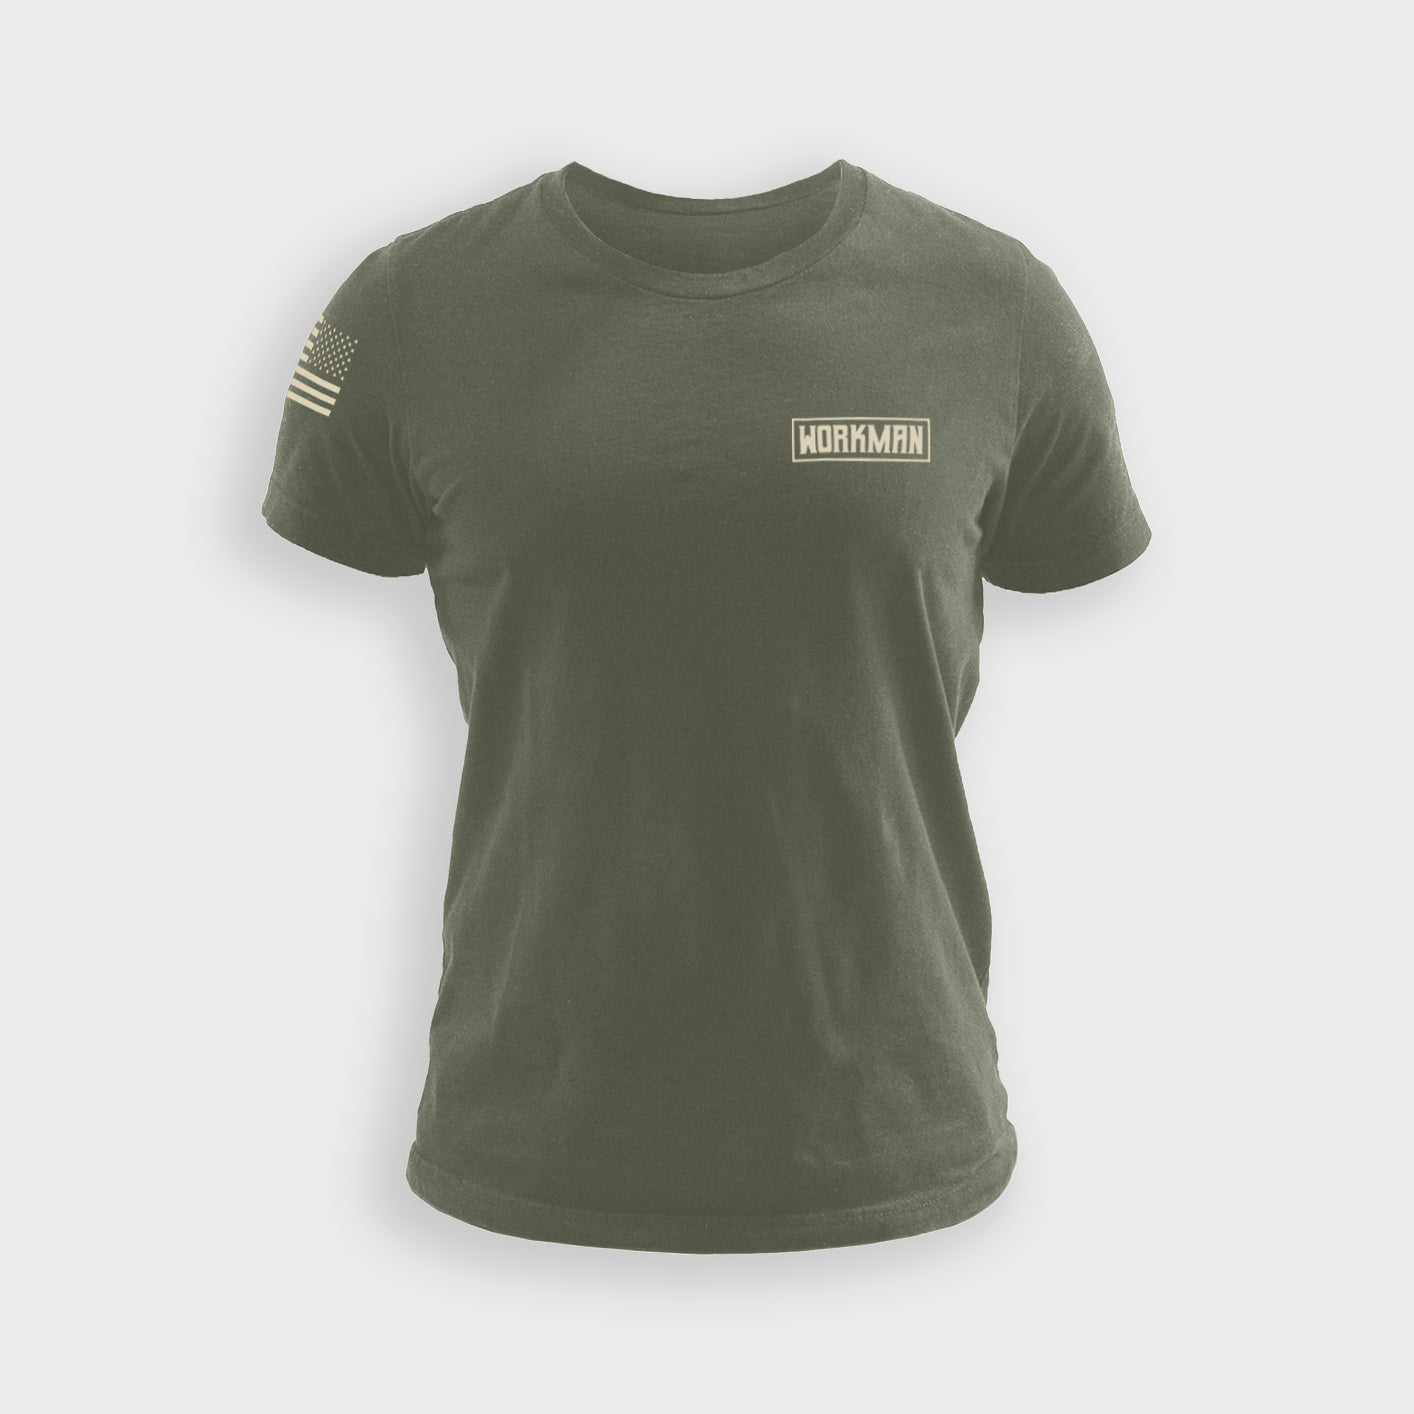 Mission First - Army Tee